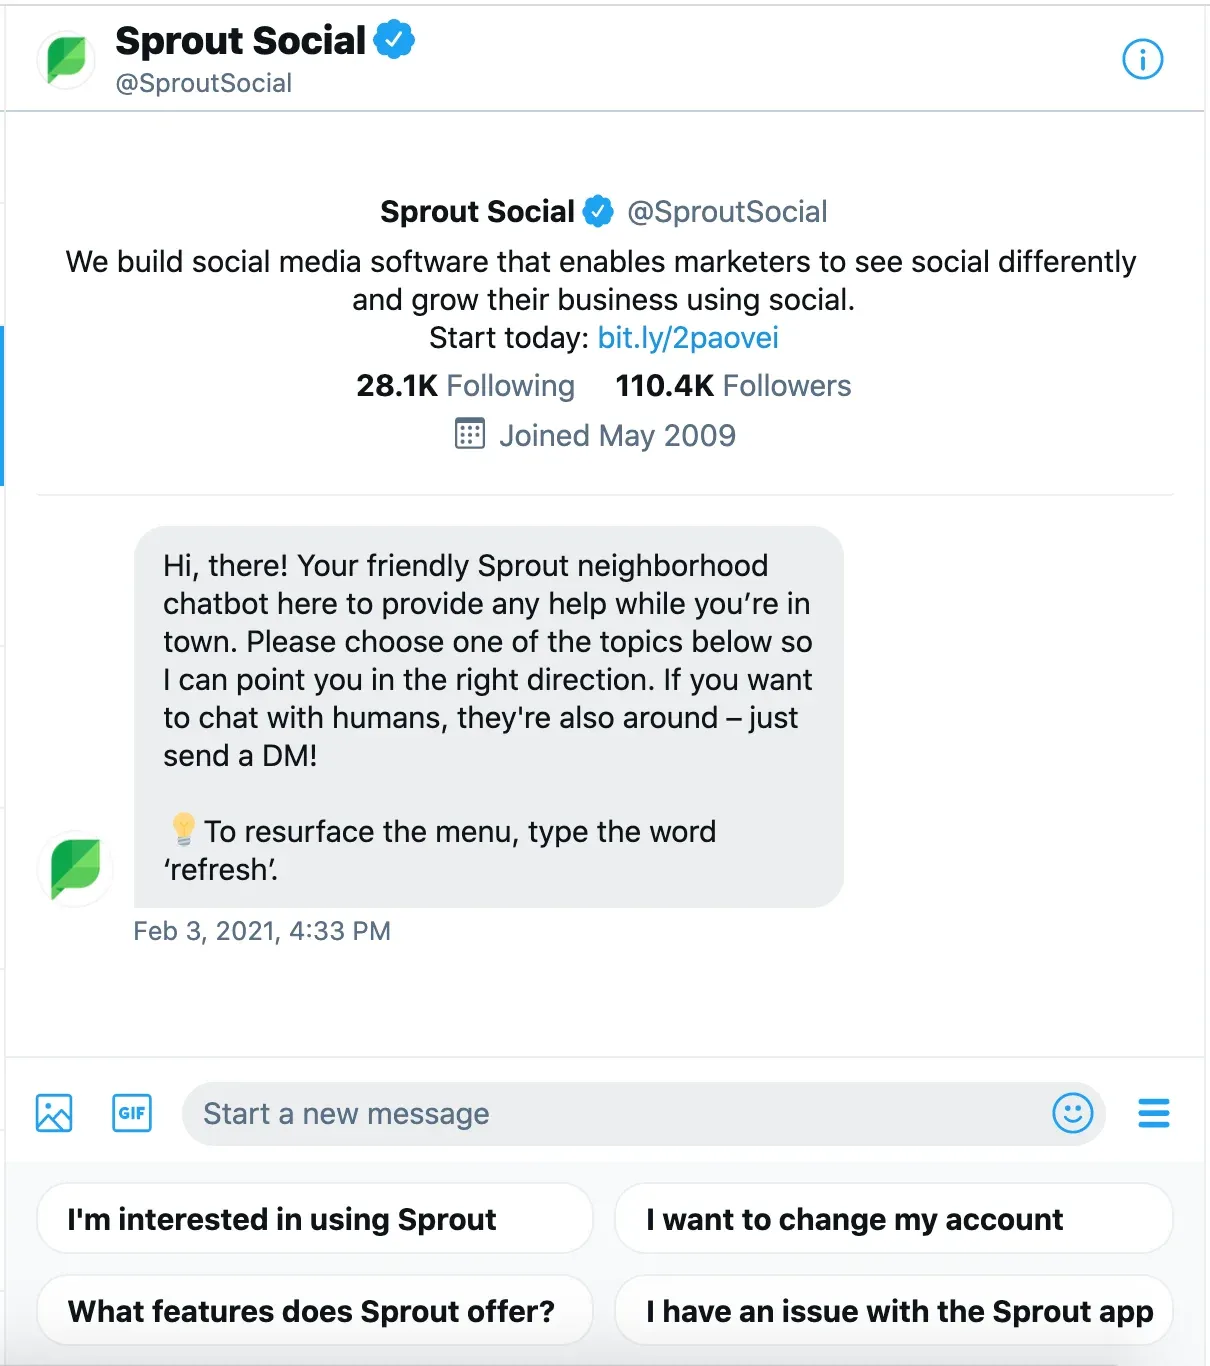 Sprout Social customer service chatbot